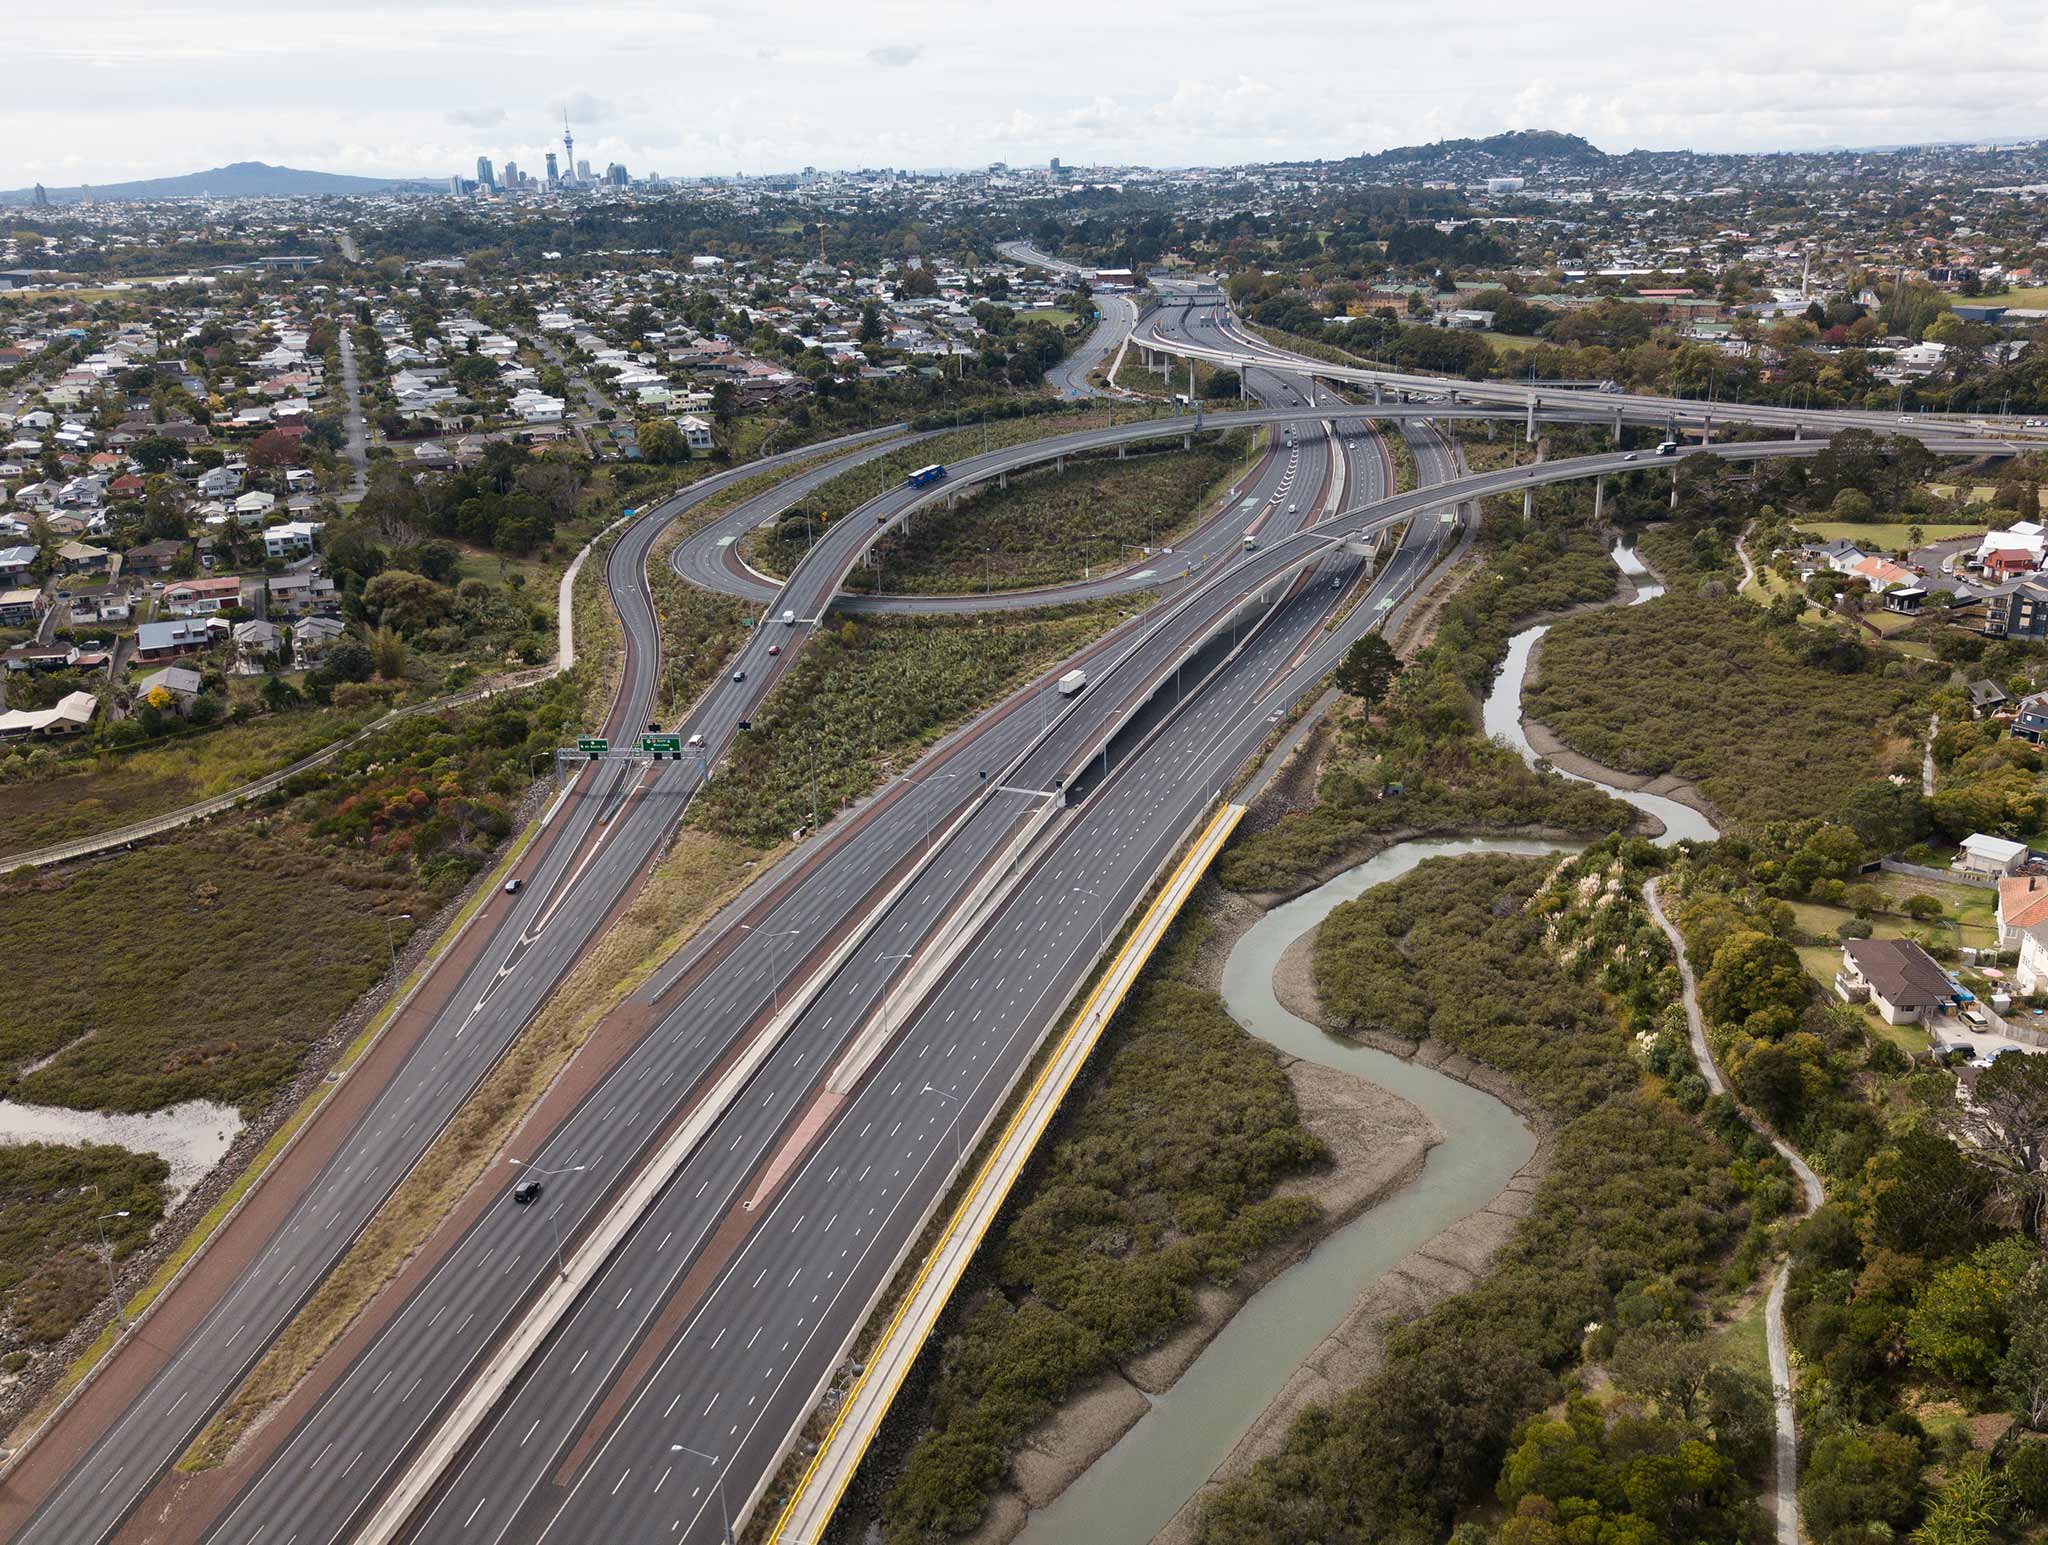 Photo of an aerial view of the motorway, with very few cars on it.